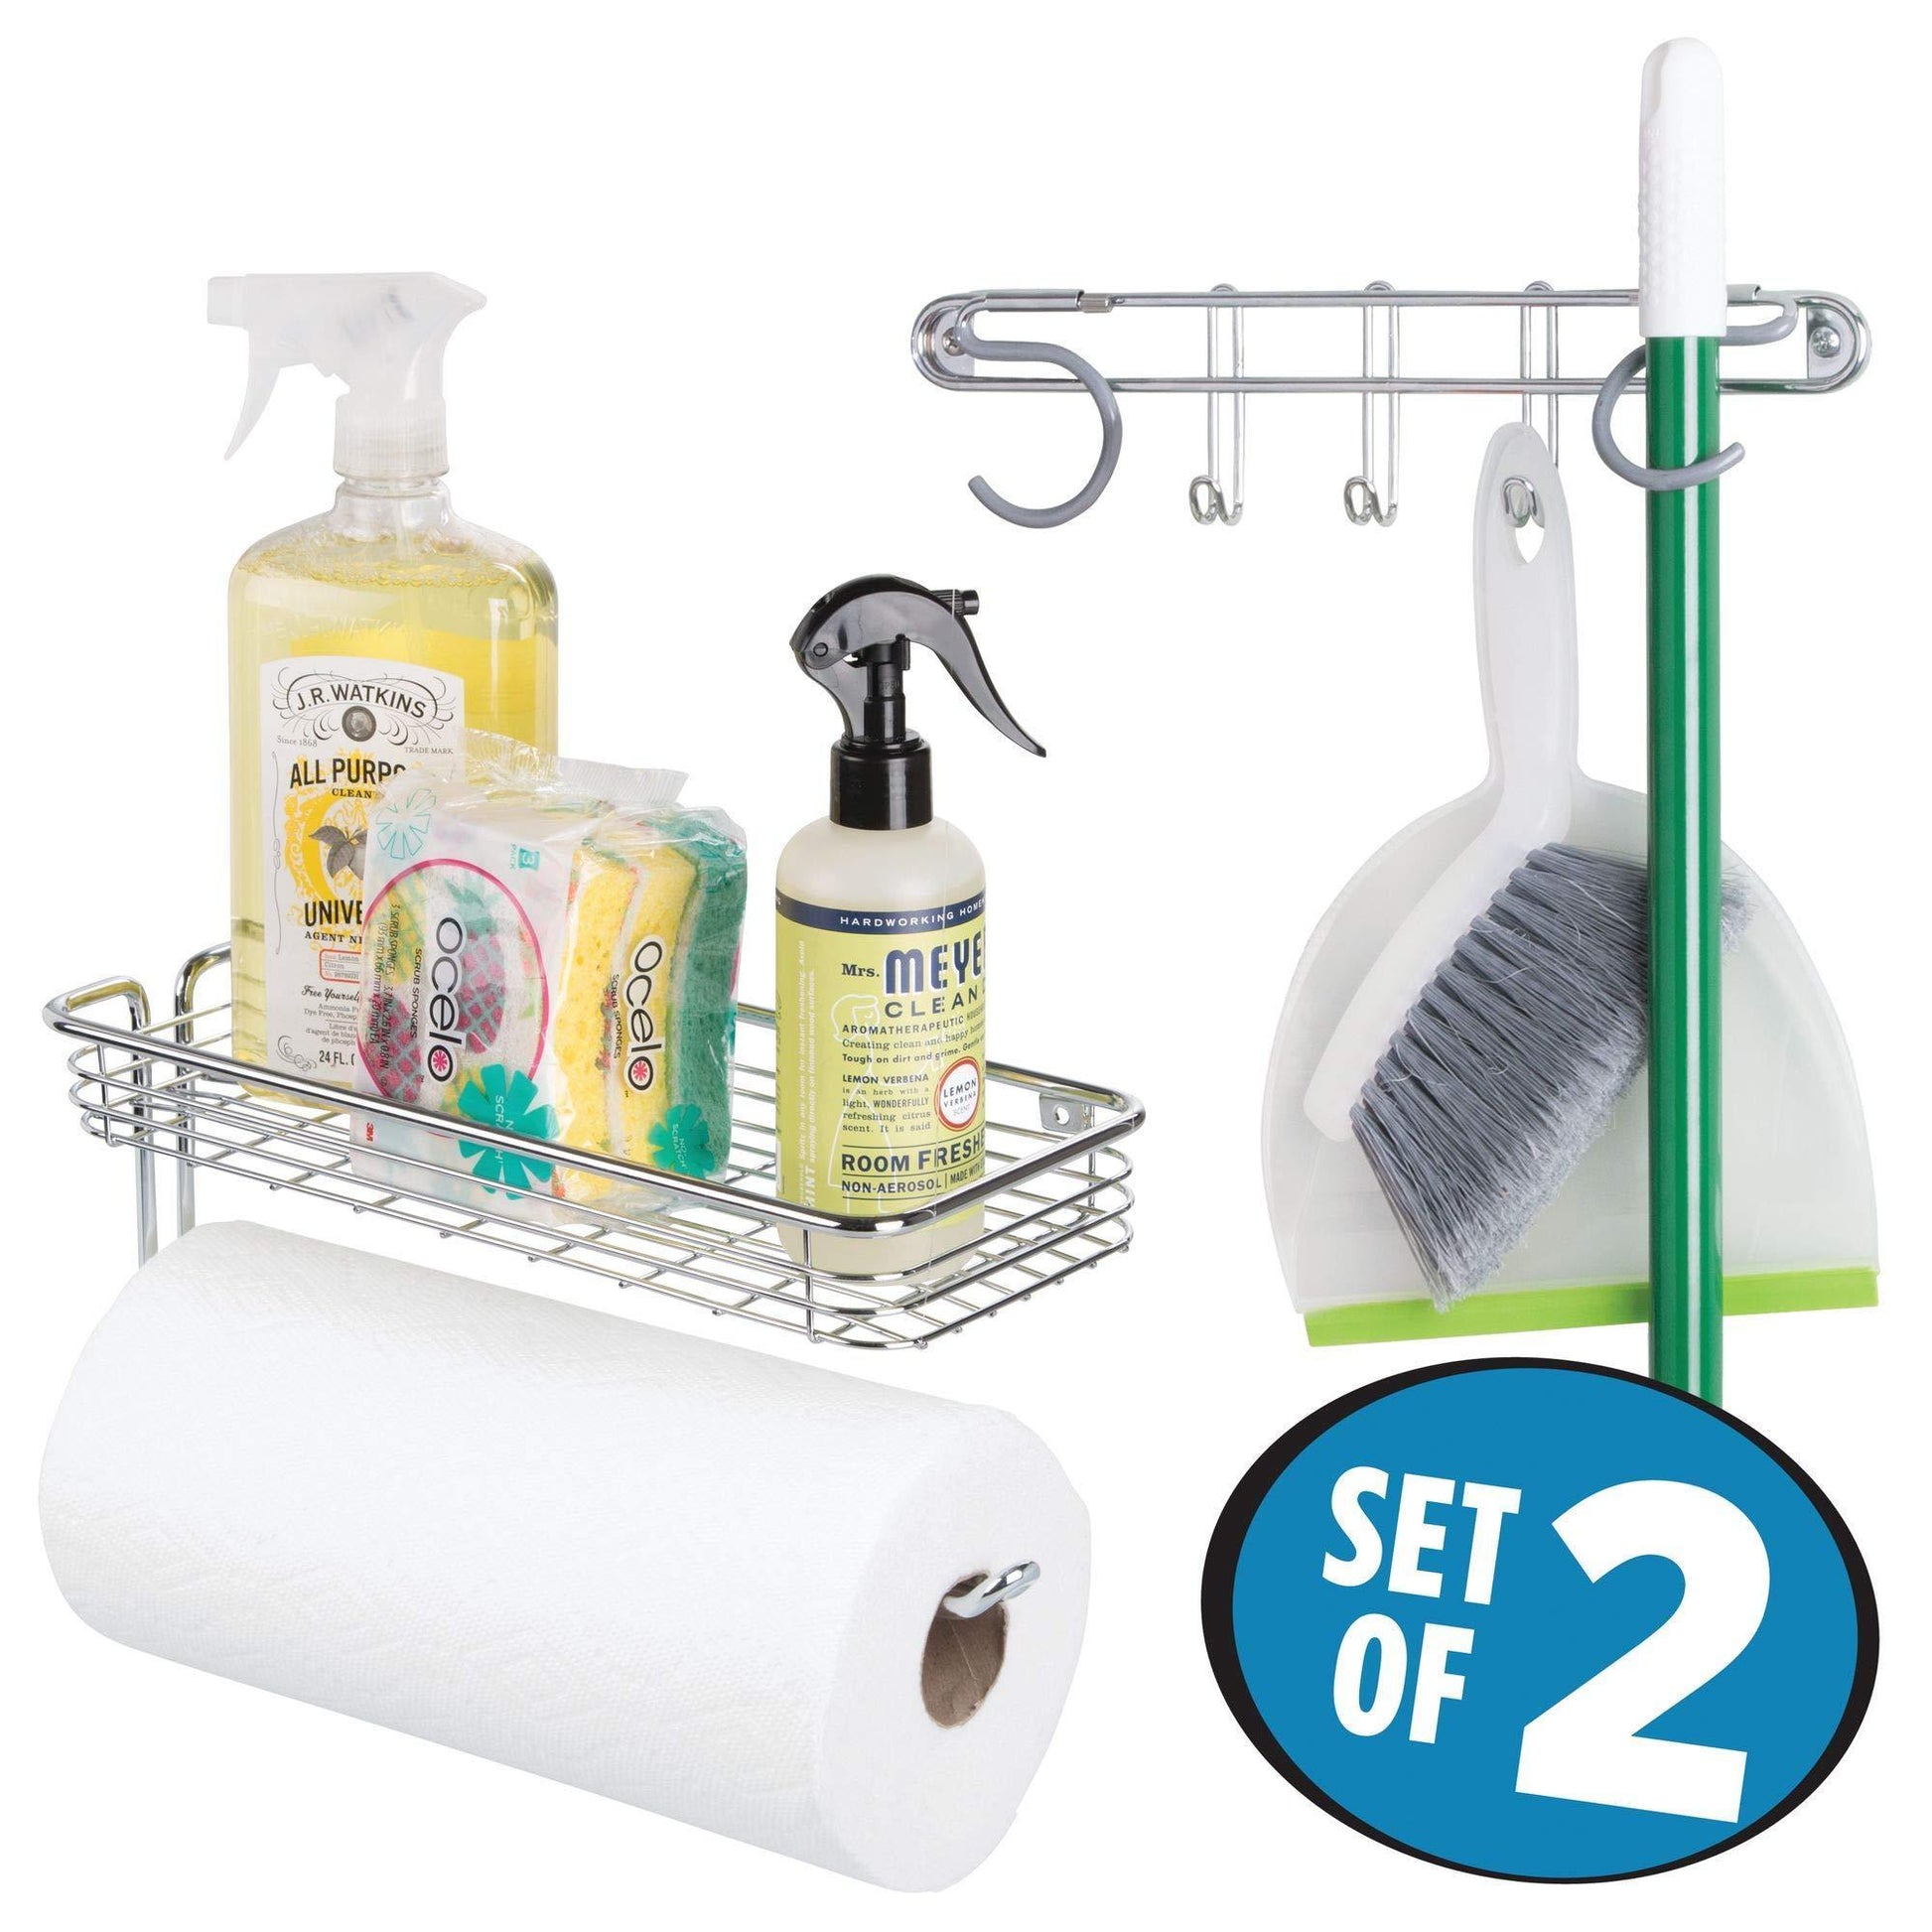 Shop here mdesign wall mount metal storage organizers for kitchen includes paper towel holder with multi purpose shelf and broom mop holder with 3 hooks for pantry laundry garage 2 piece set chrome